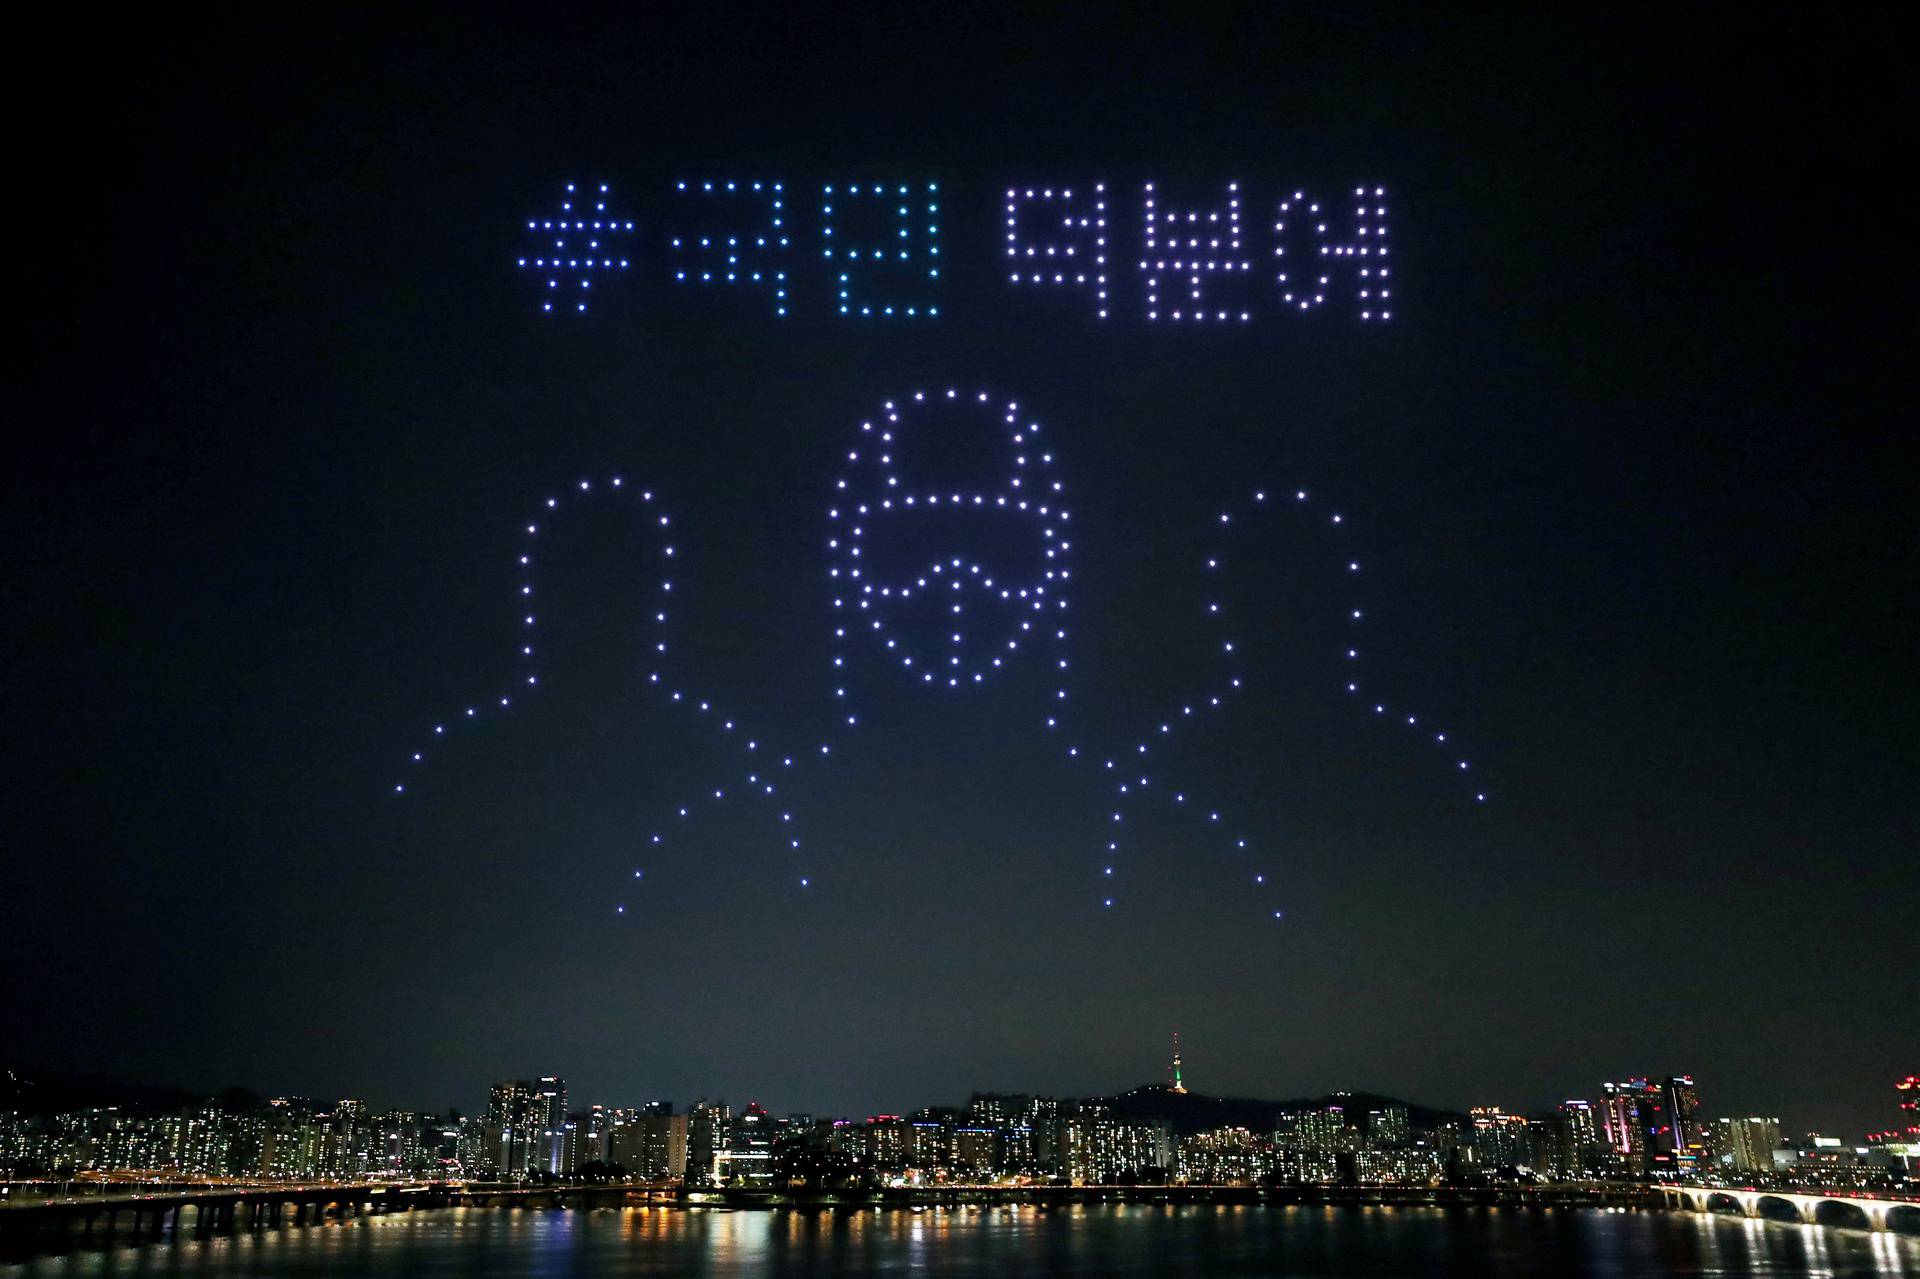 Drones fly over the Han river showing messages to support the country as measures to avoid the spread of the coronavirus disease (COVID-19) continue in Seoul